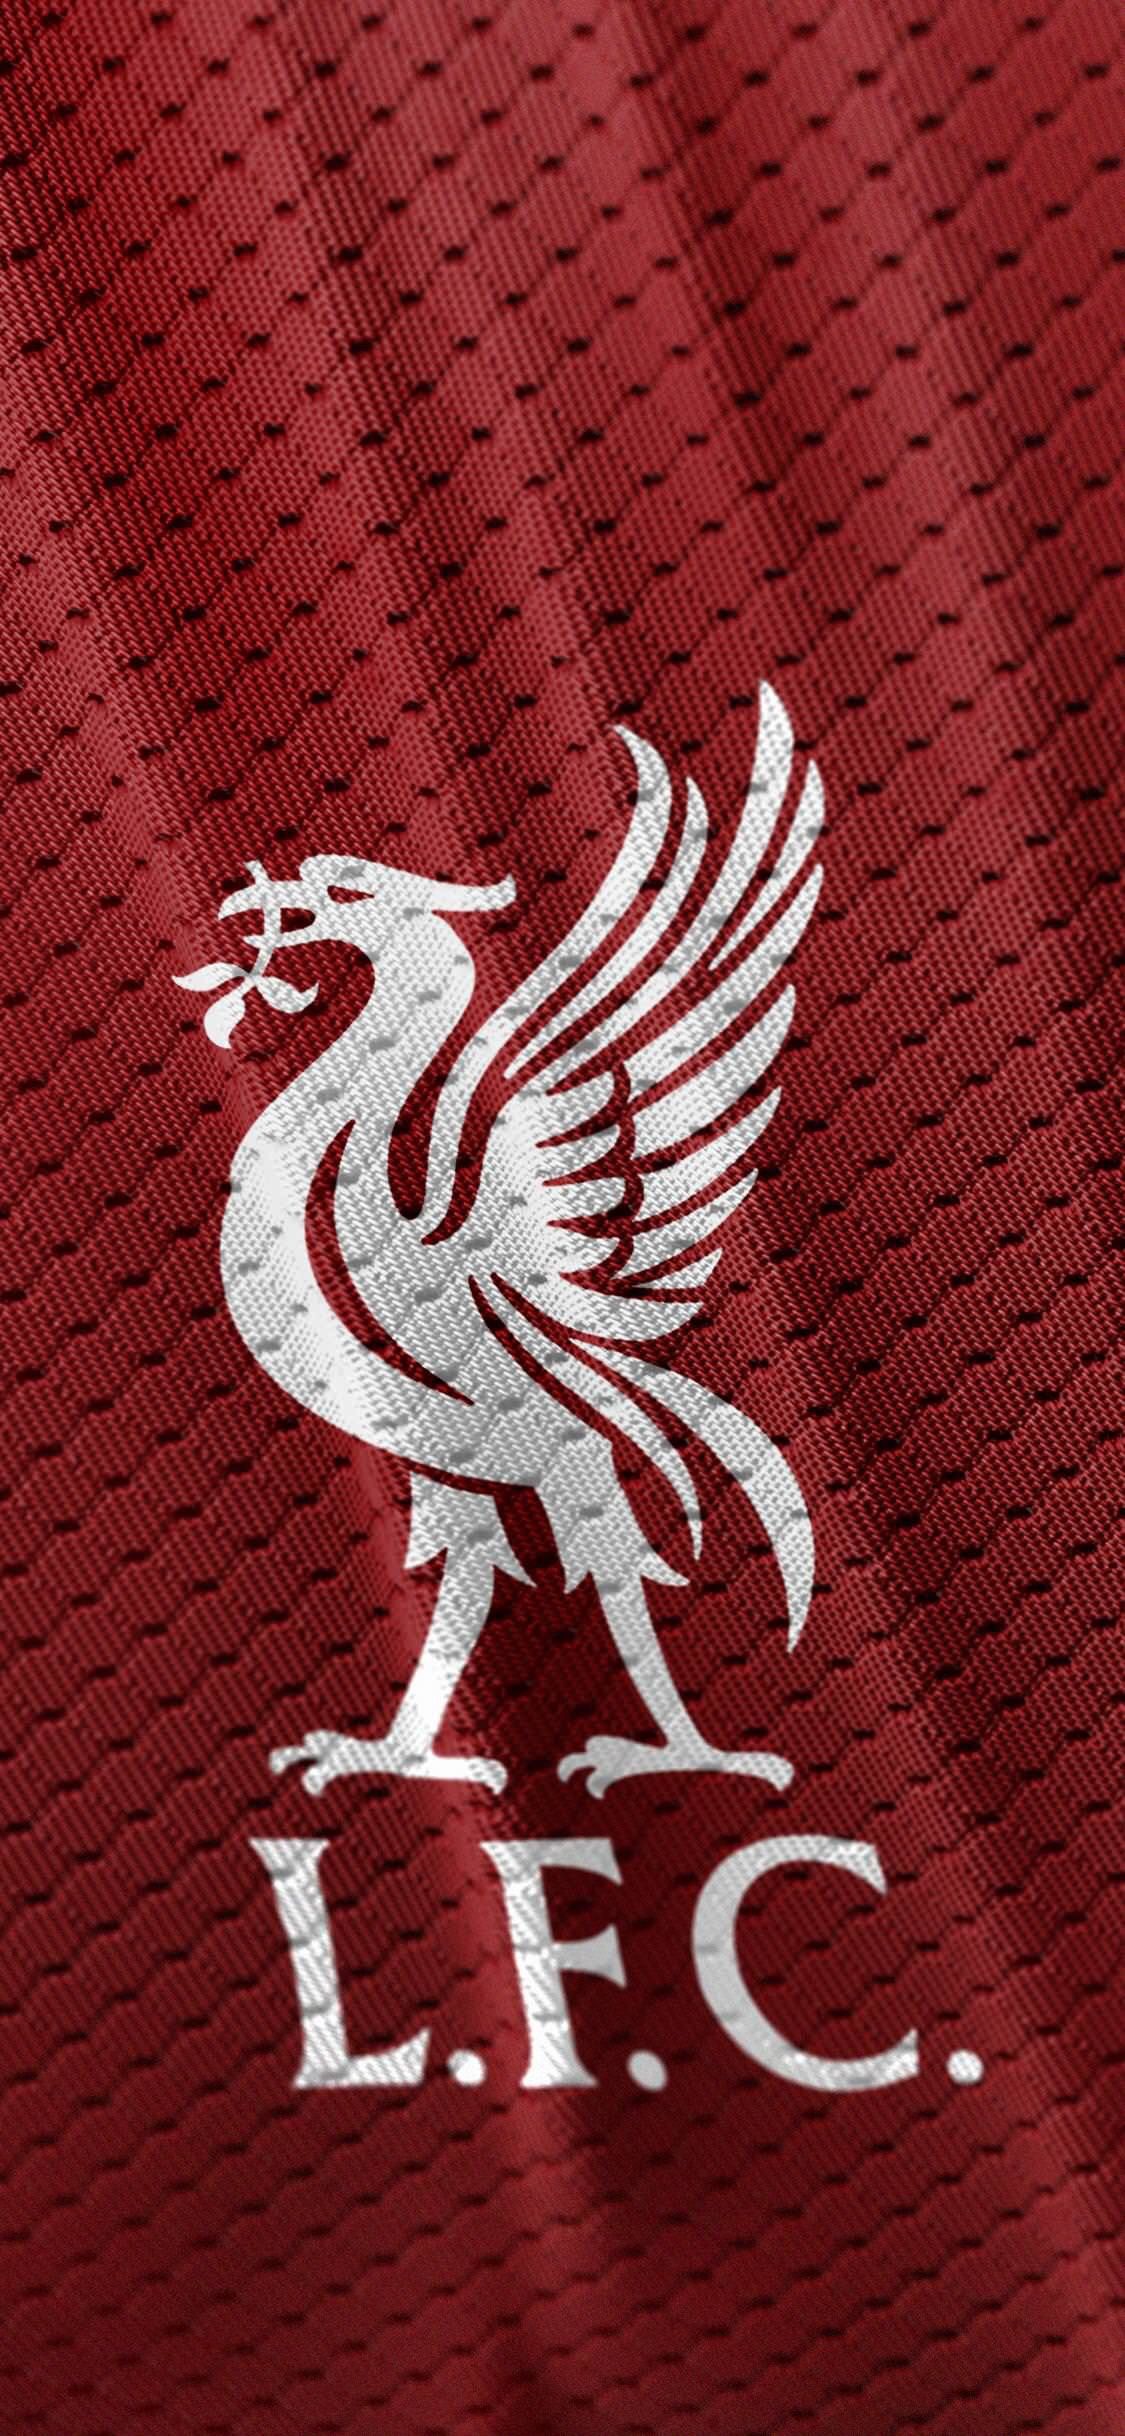 Lets share some Liverpool Theme Phone Wallpaper